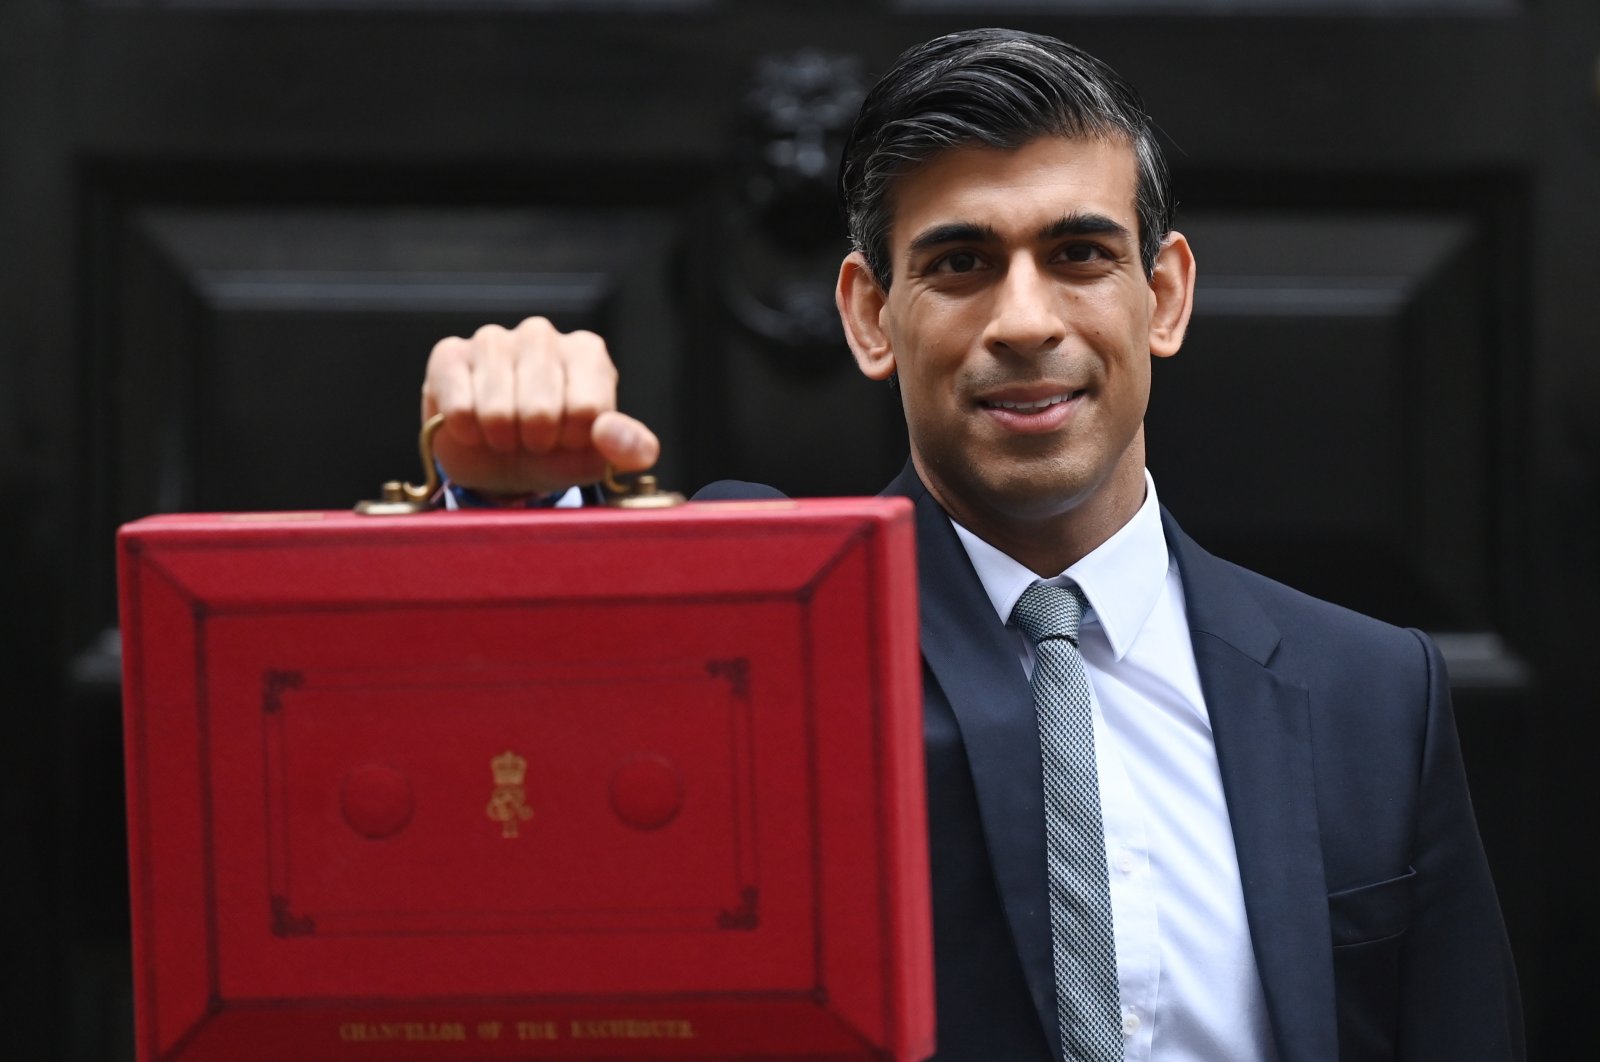 Britain's Chancellor of the Exchequer Rishi Sunak poses for photographers with the Budget box as he leaves 11 Downing Street in London, Britain, Oct. 27, 2021. (EPA Photo)